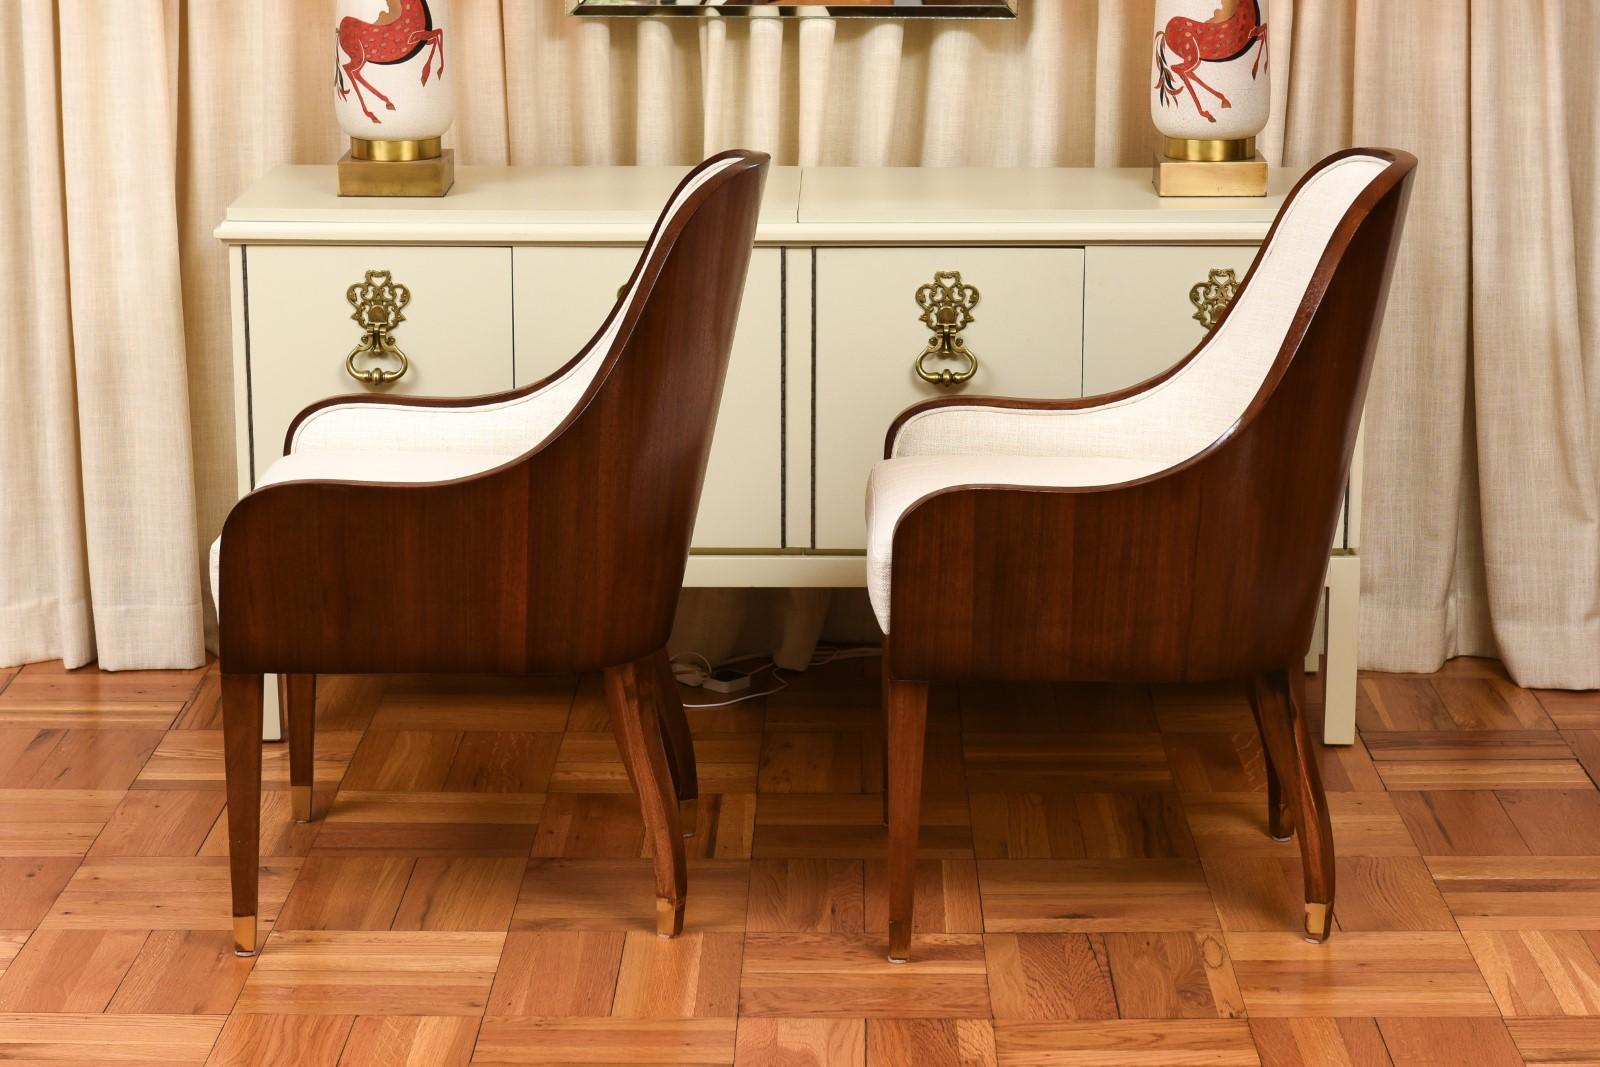 Spectacular Set of 10 Art Deco Revival Chairs in Bookmatch Figured Walnut For Sale 7